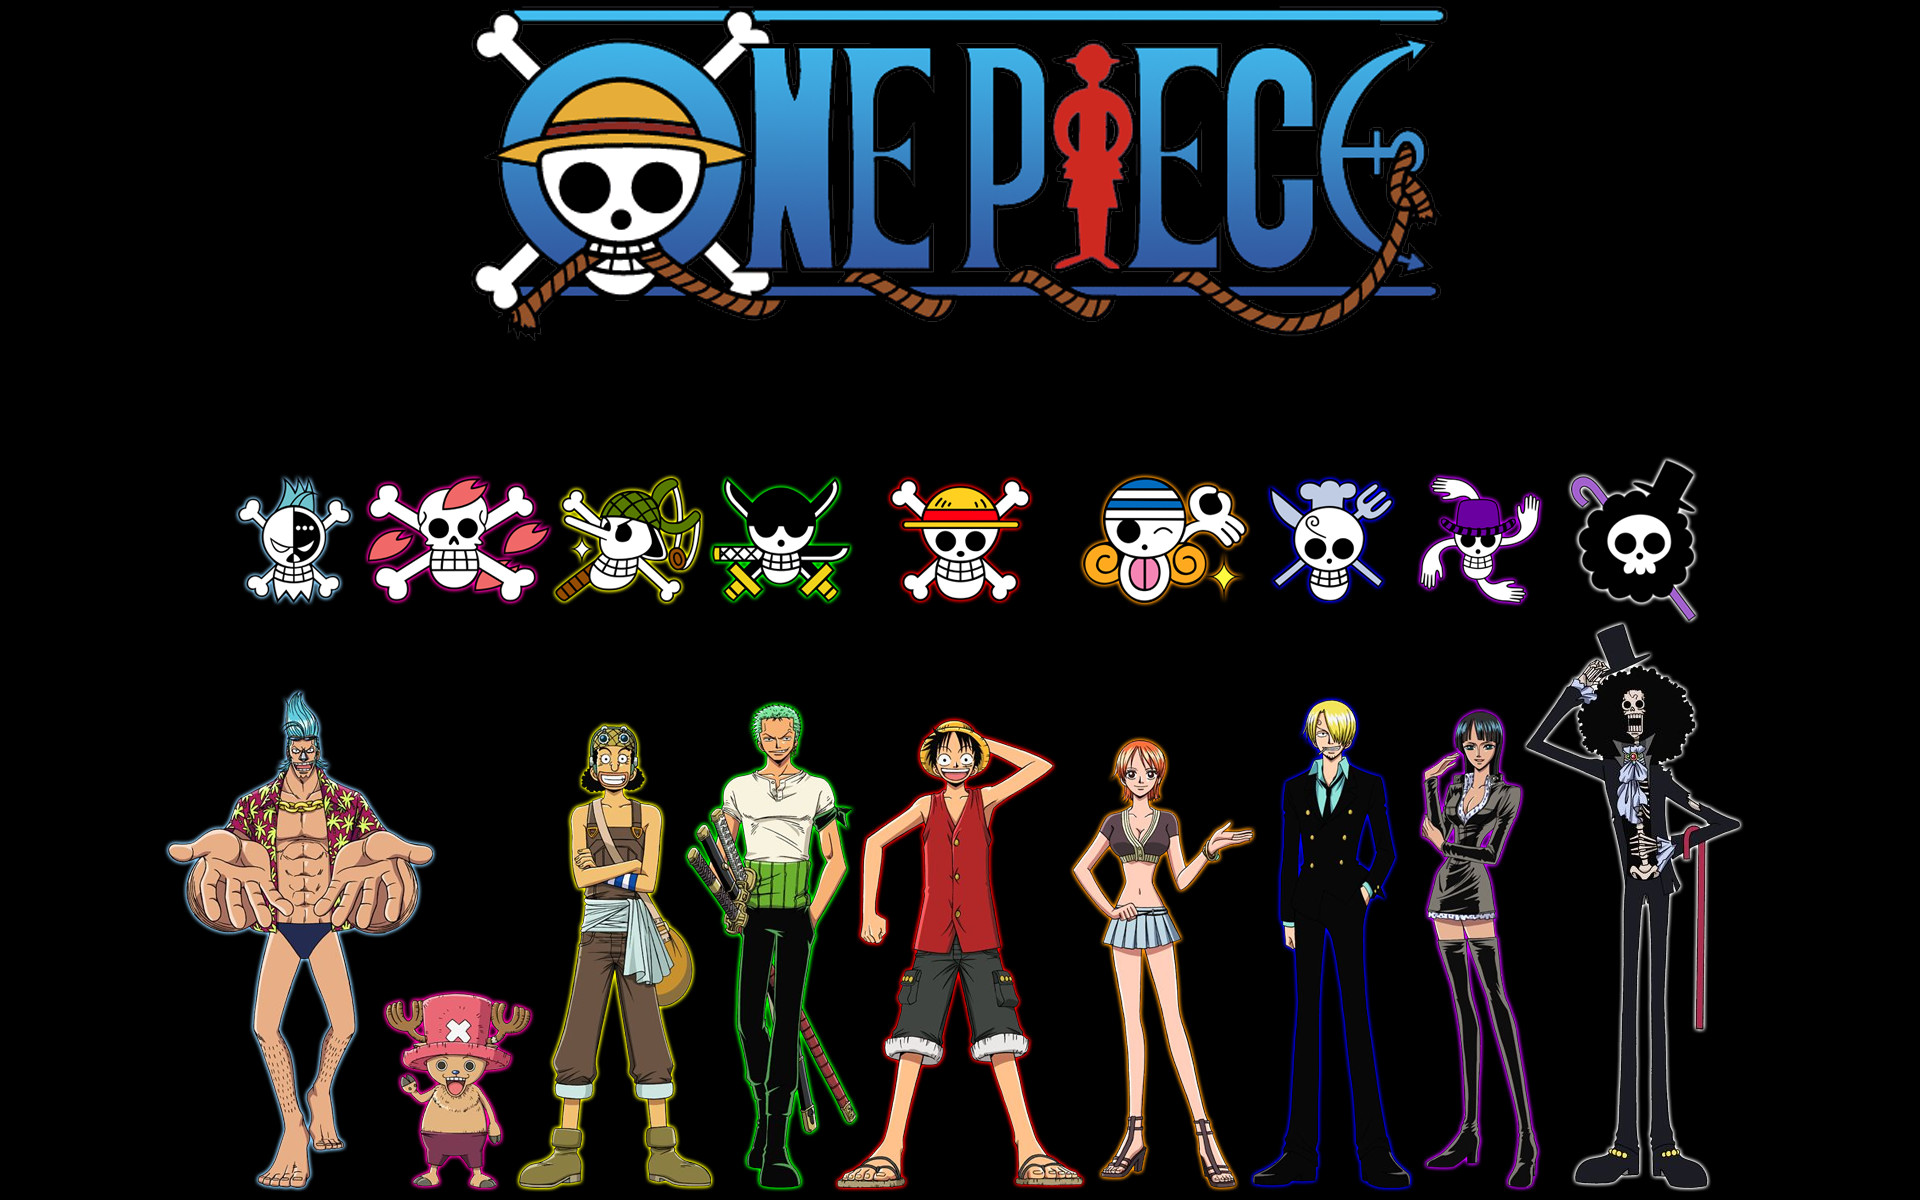 best ideas about One Piece Wallpaper Iphone on Pinterest